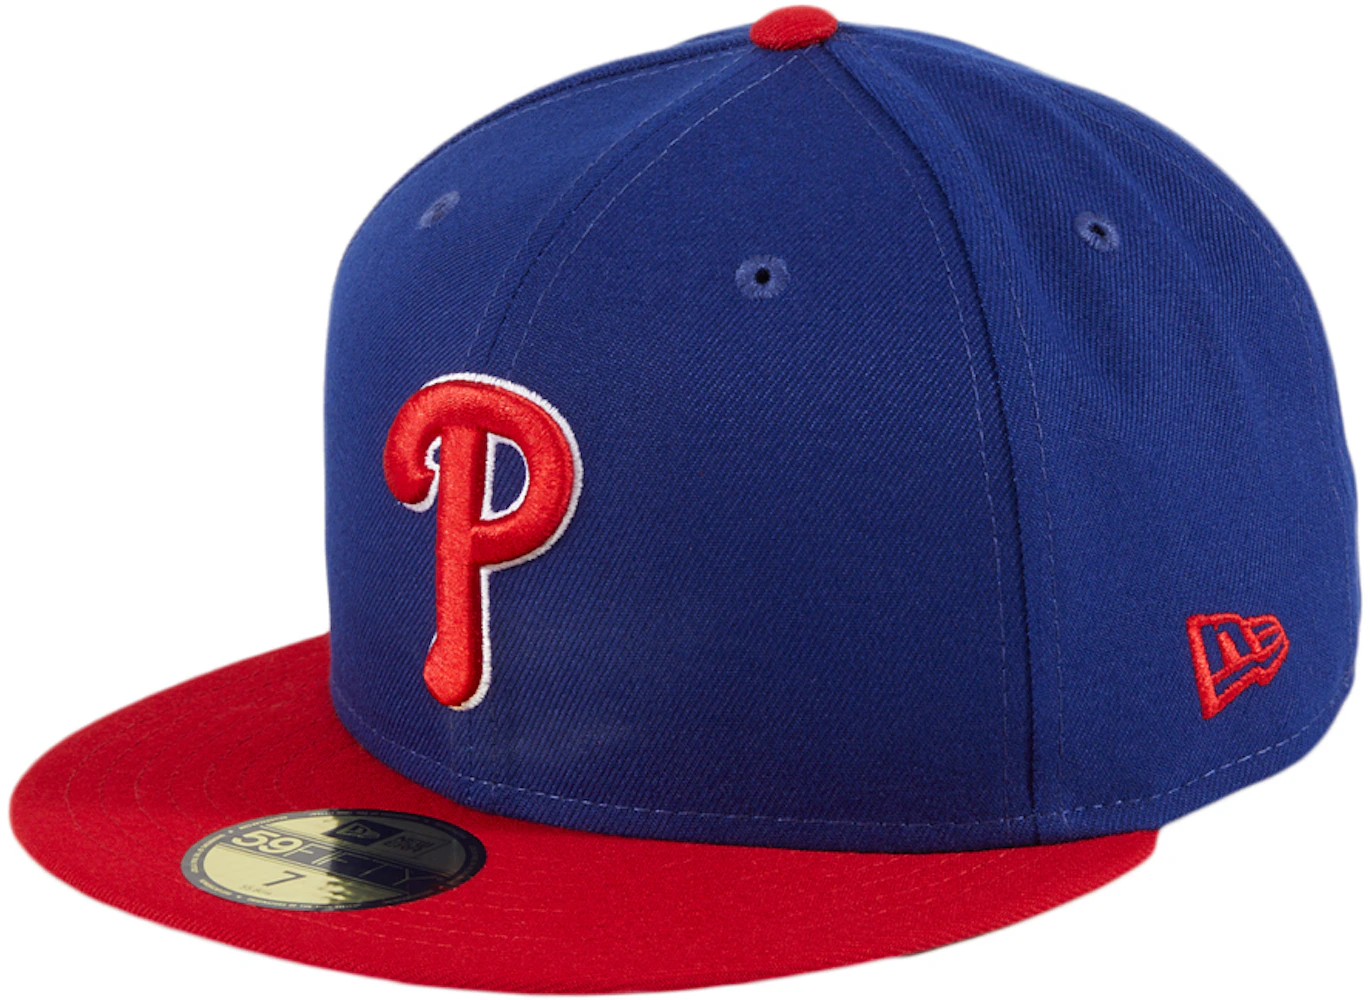 Philadelphia Phillies Authentic On Field Red 59FIFTY Cap